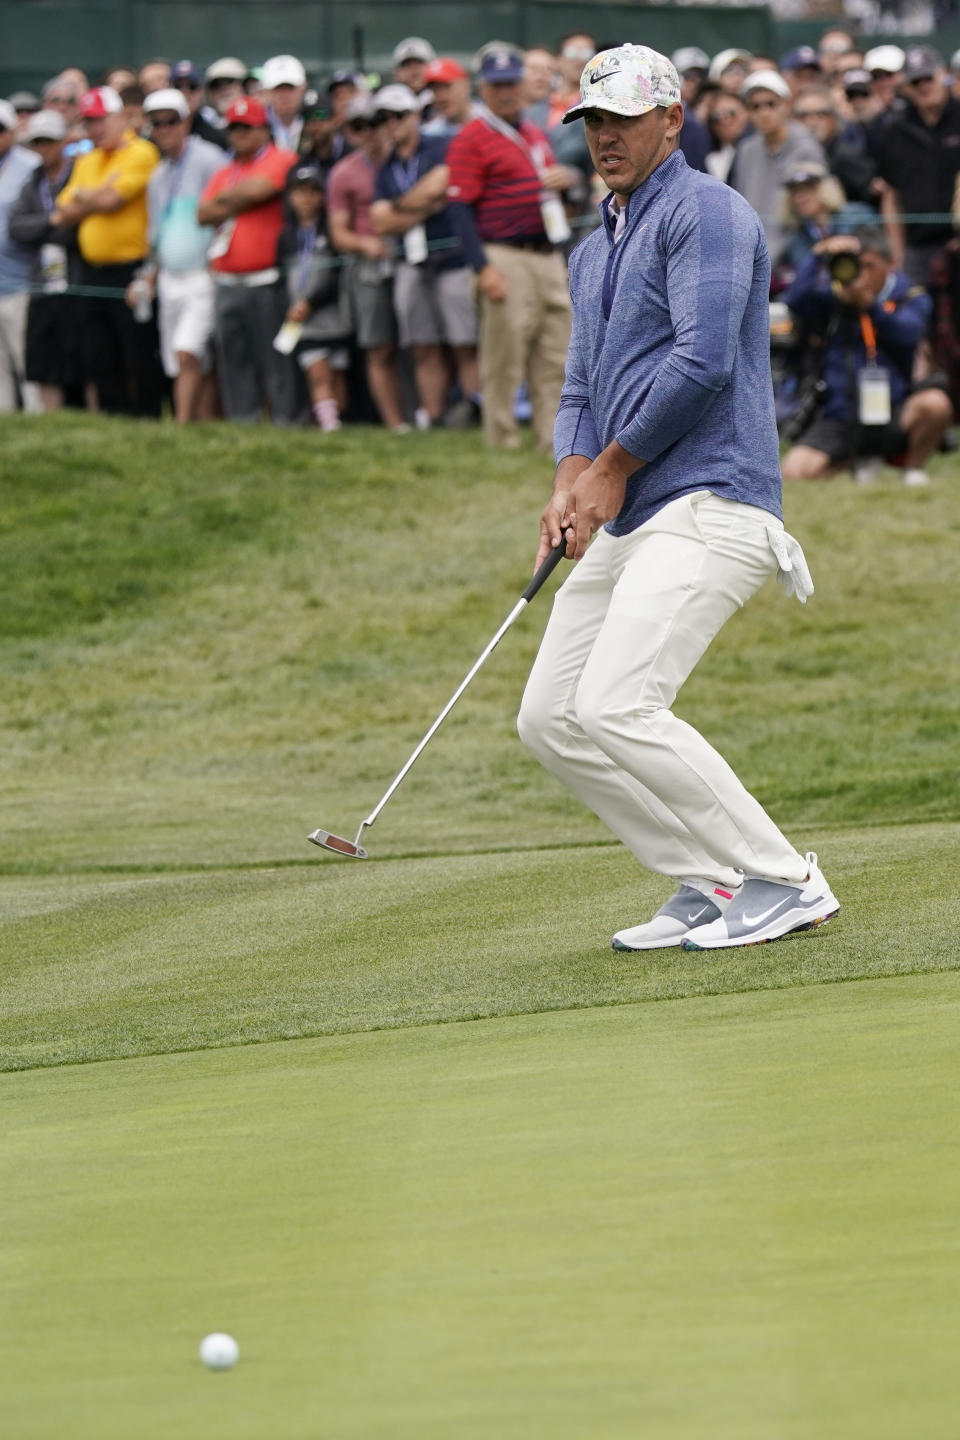 Brooks Koepka reacts after missing an eagle putt on the sixth hole during the first round of the U.S. Open Championship golf tournament Thursday, June 13, 2019, in Pebble Beach, Calif. (AP Photo/David J. Phillip)